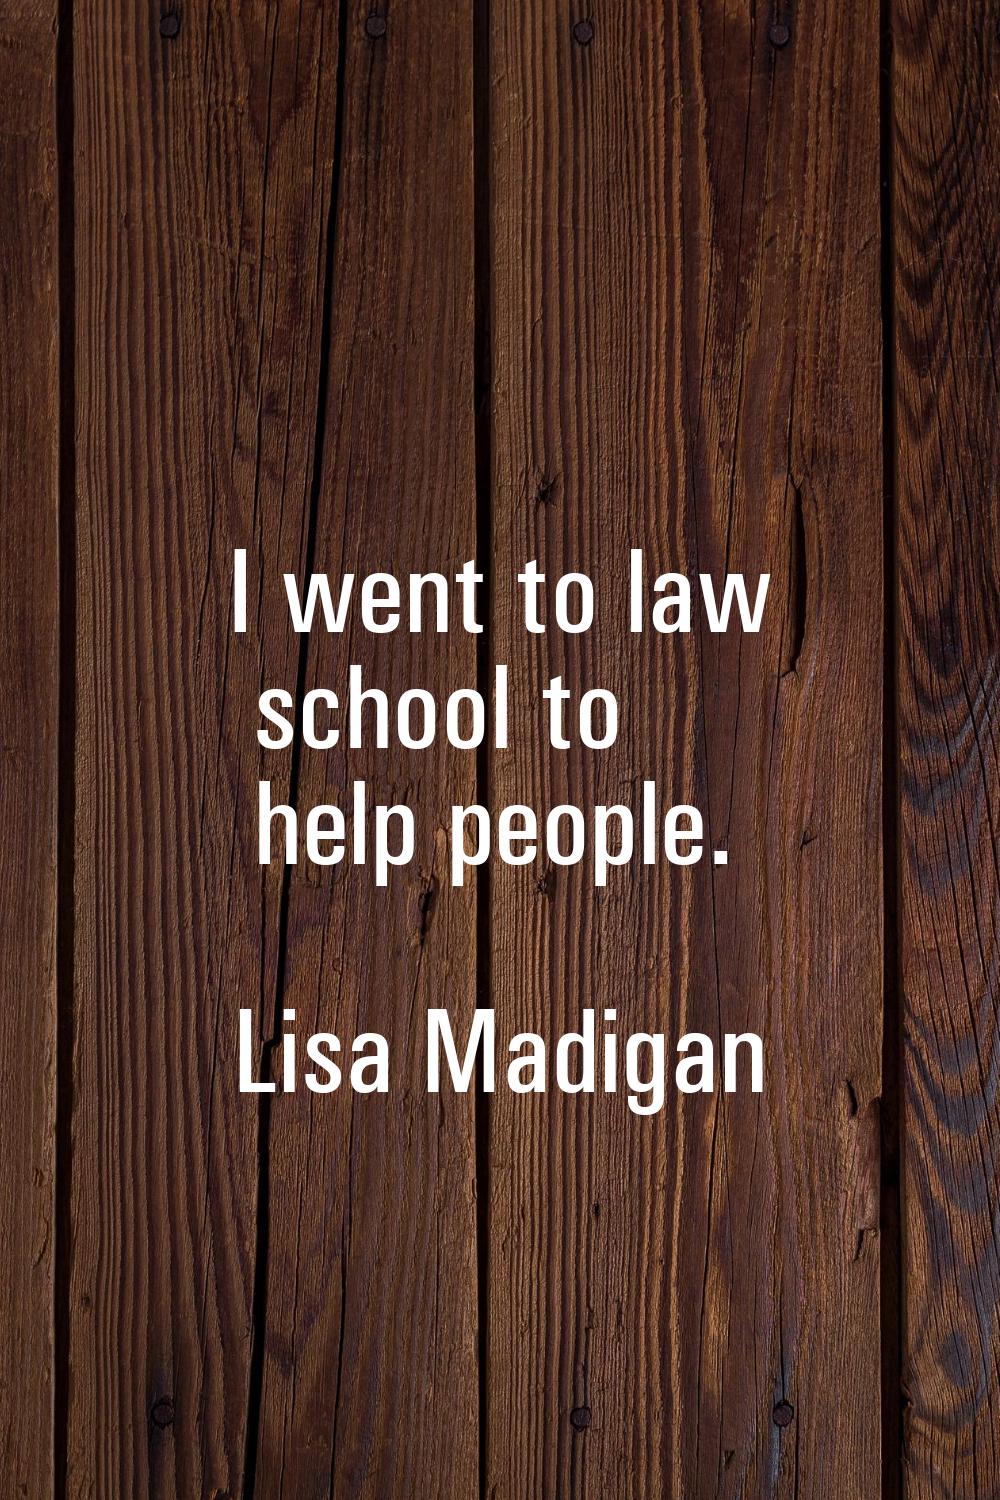 I went to law school to help people.